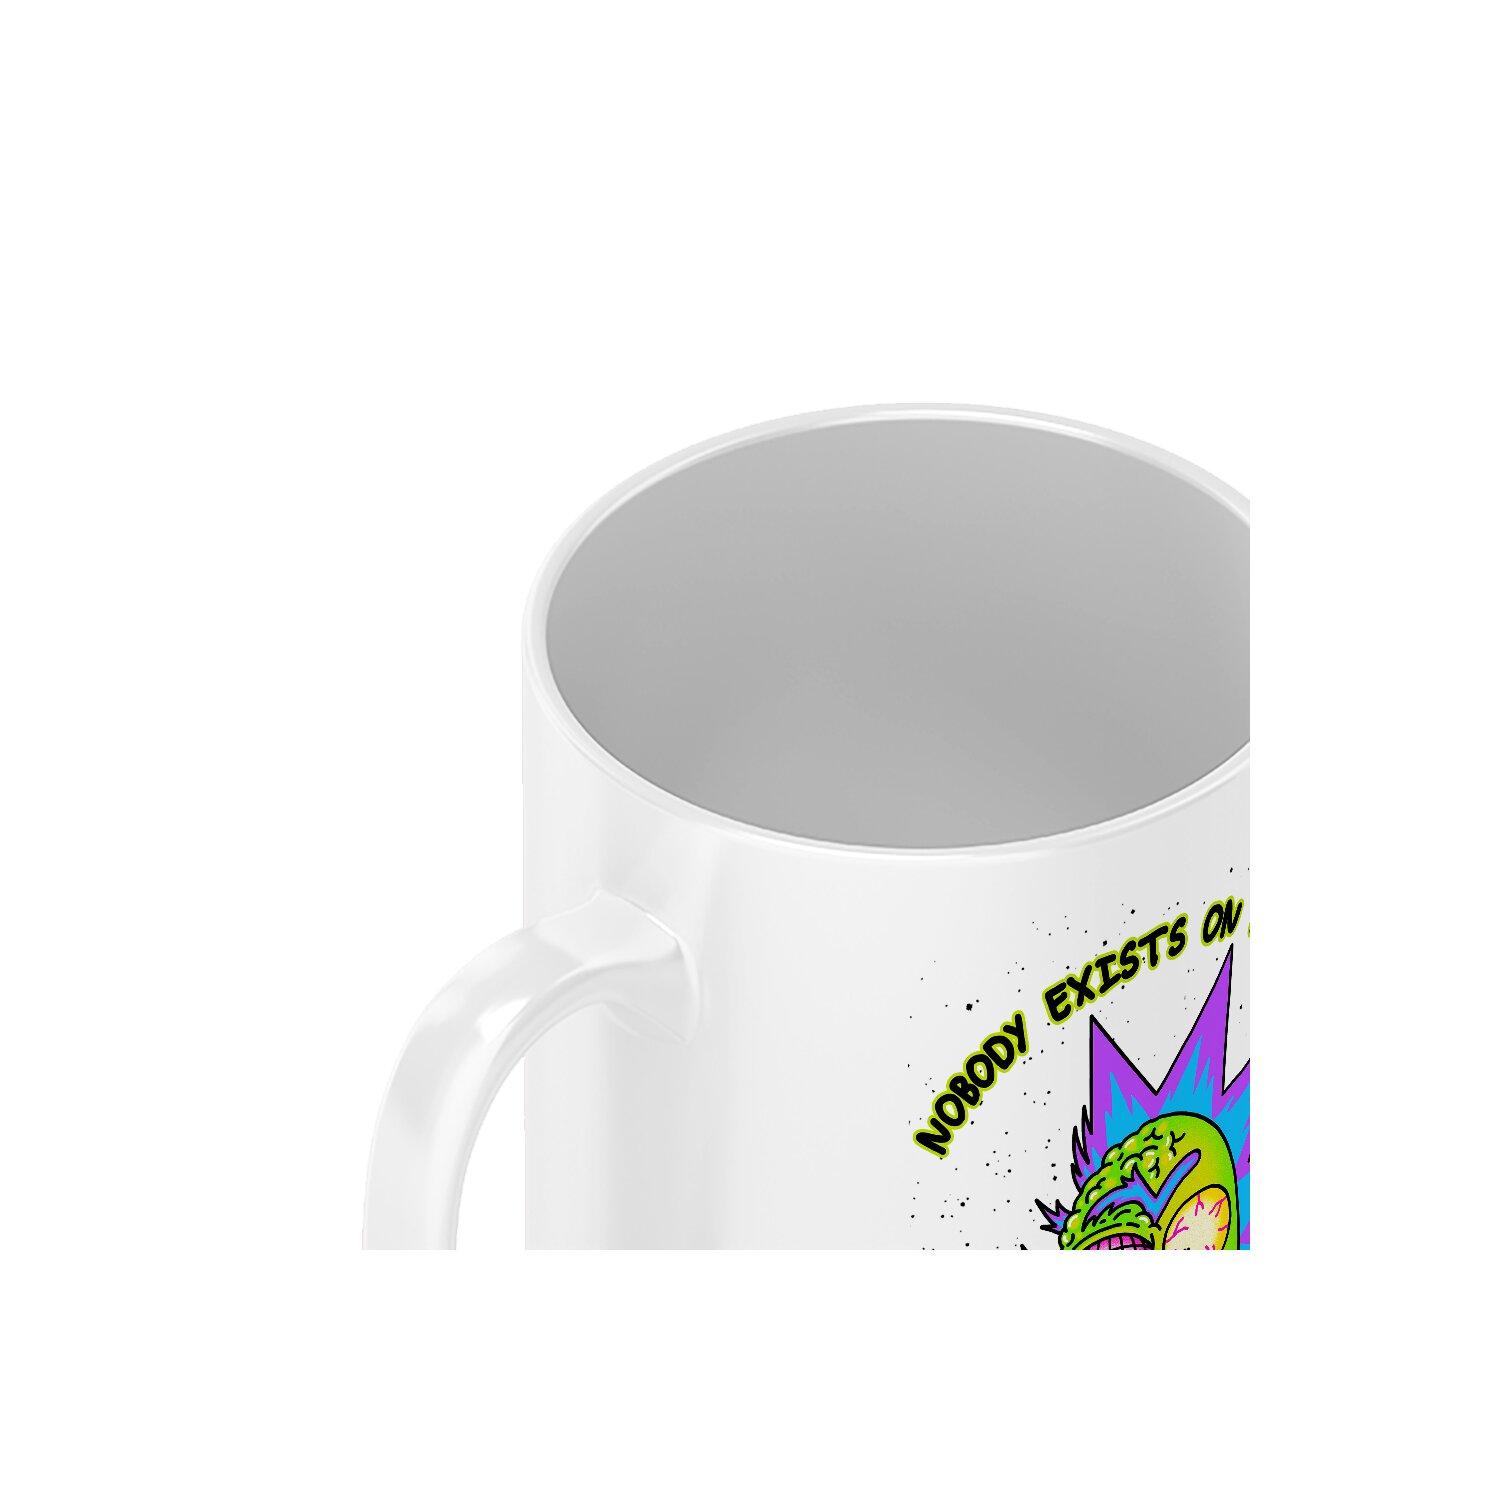 Morty und Kaffee- 010 Rick Morty 330ml Teebecher Muster and